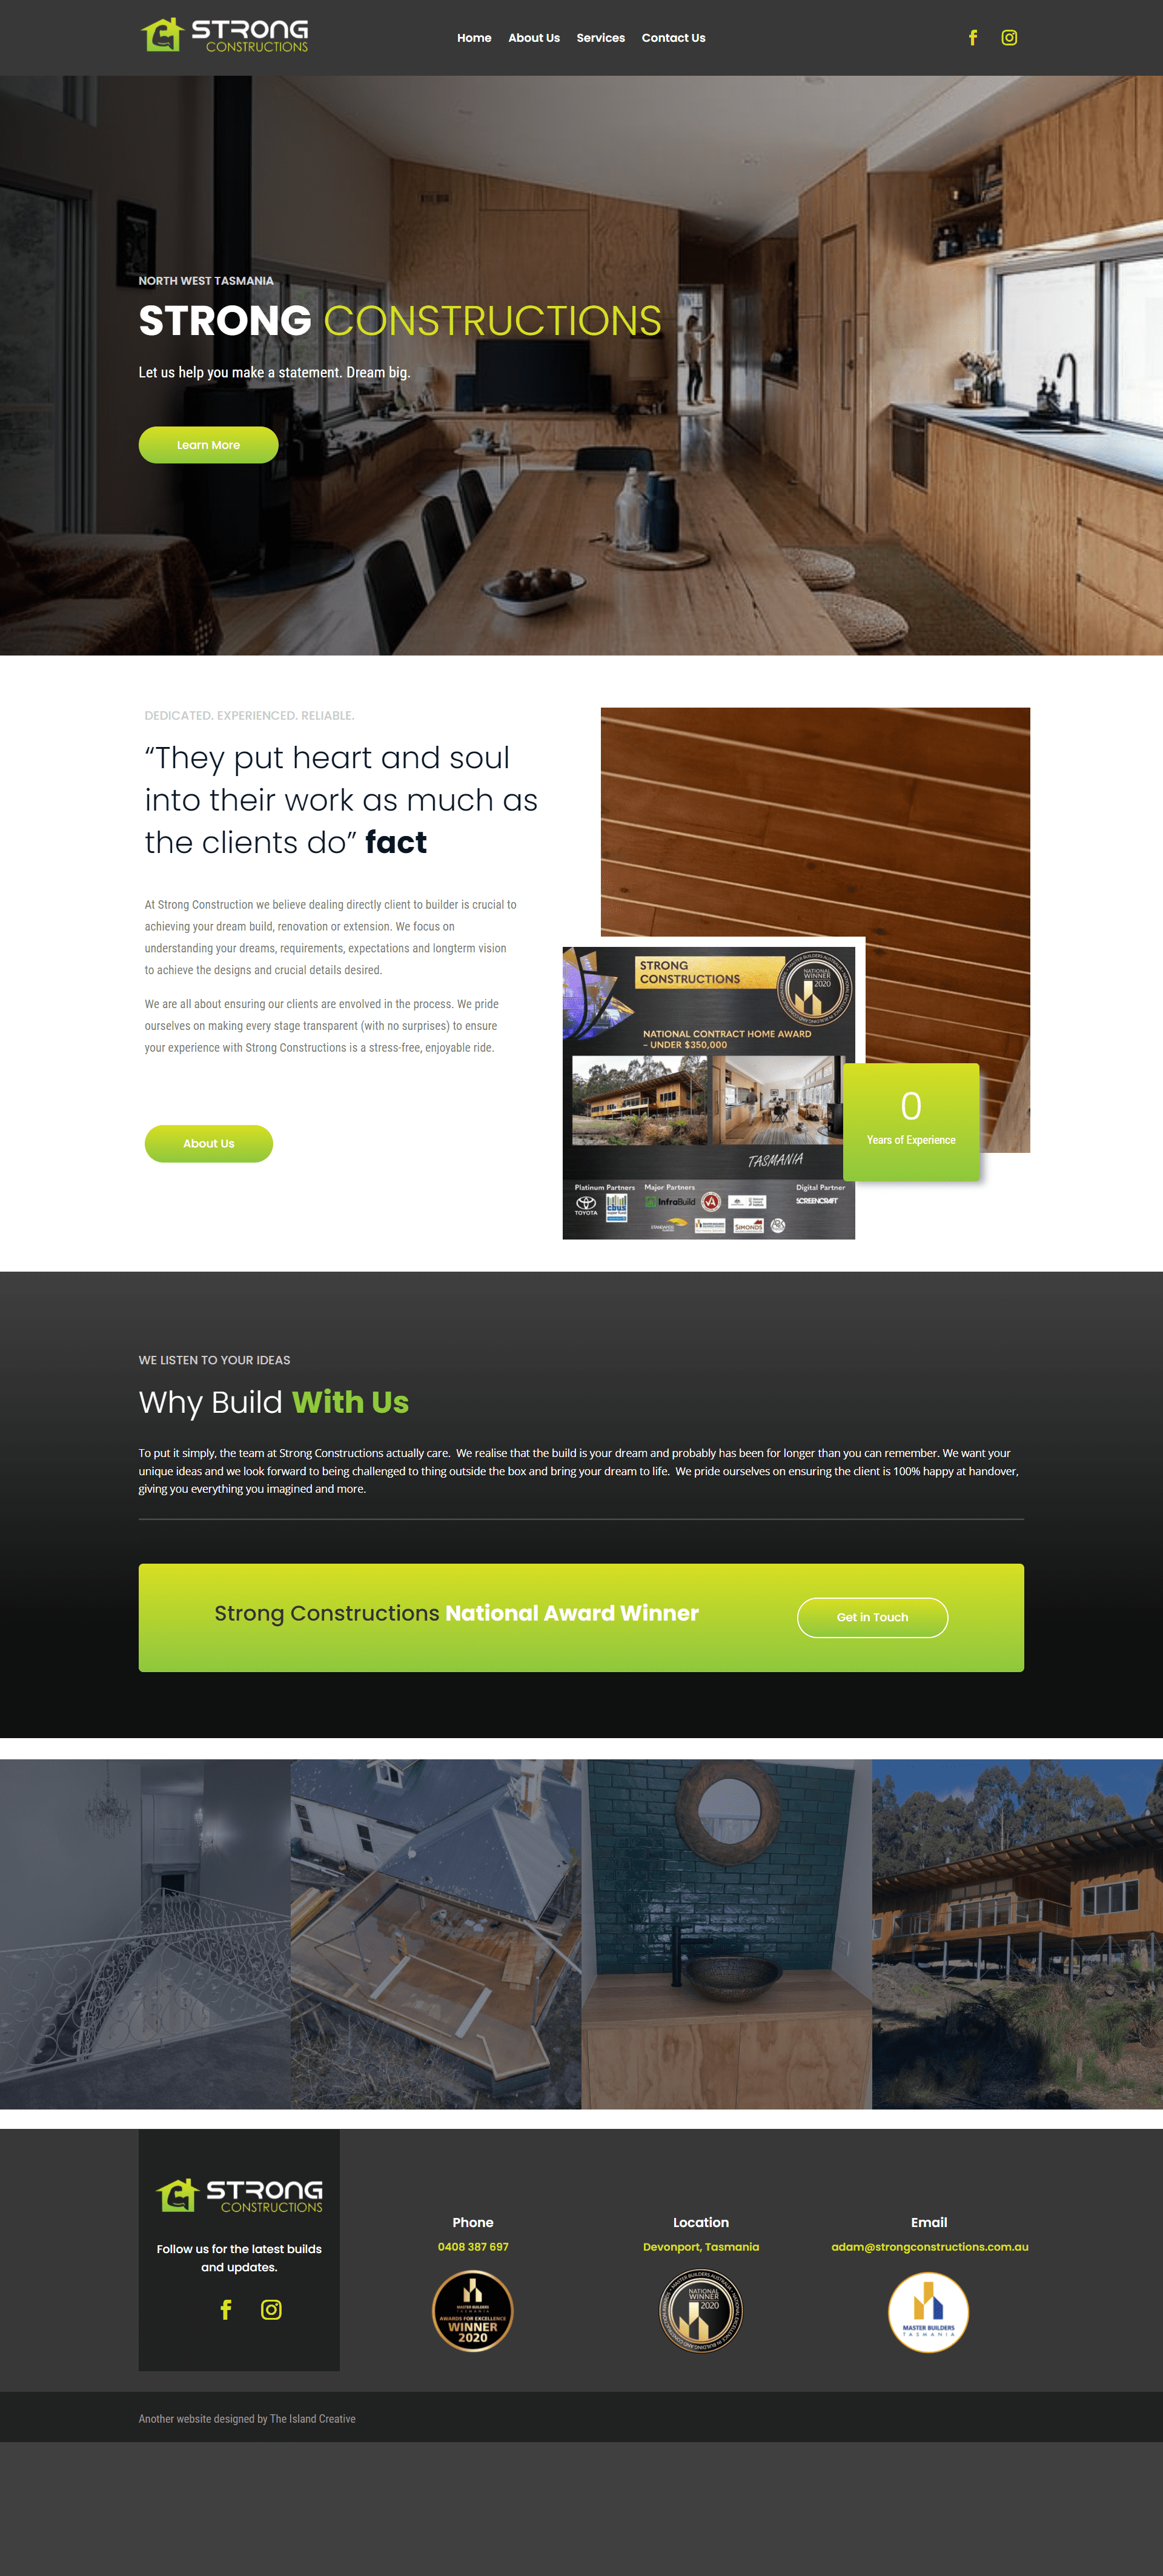 The Island Creative - rolling image of Strong Construction website